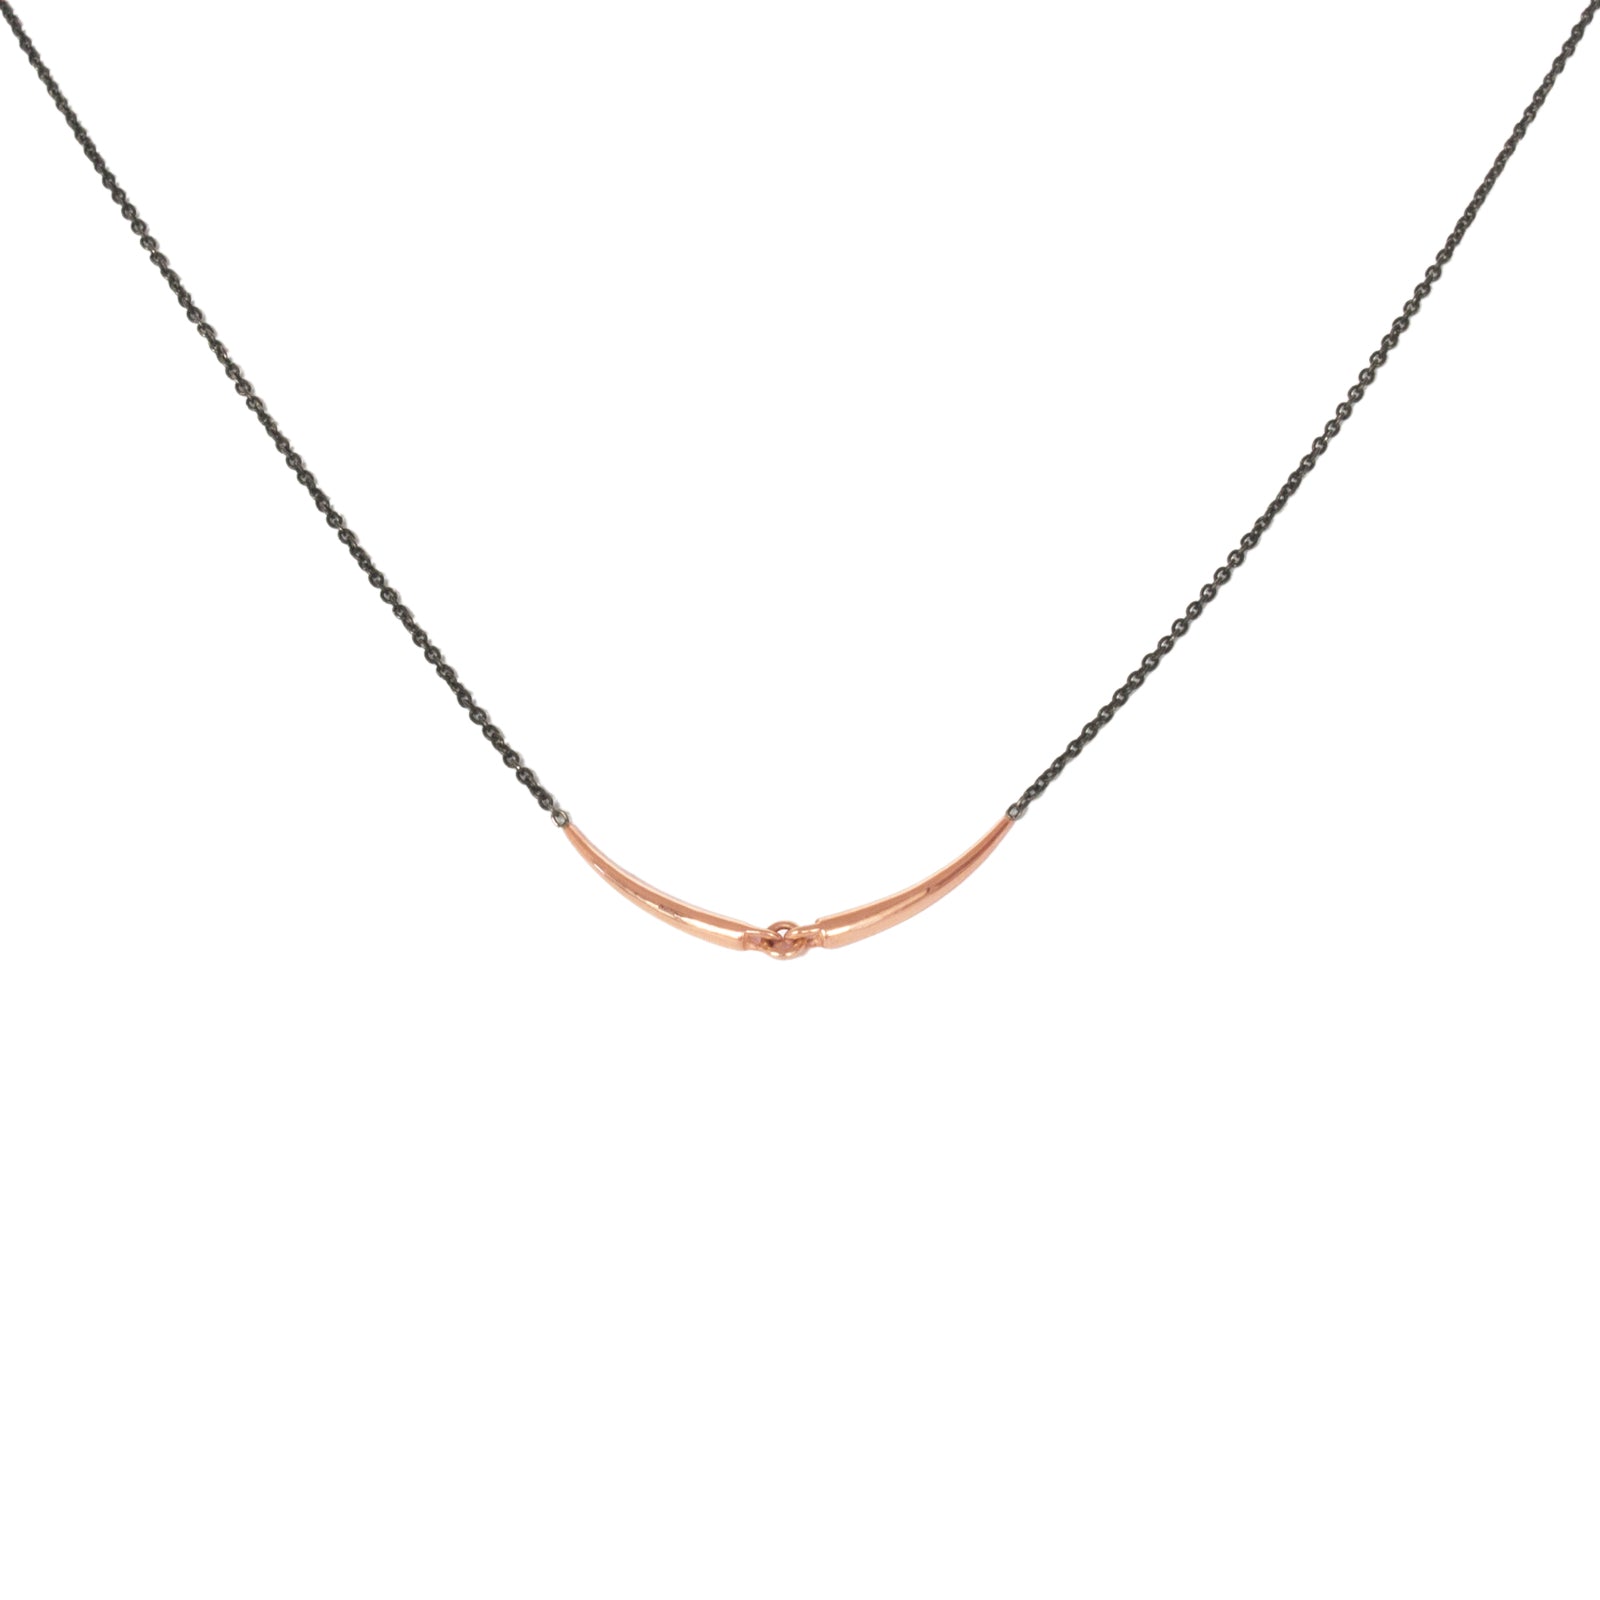 14k rose gold/oxidized silver chain mirror arpent necklace